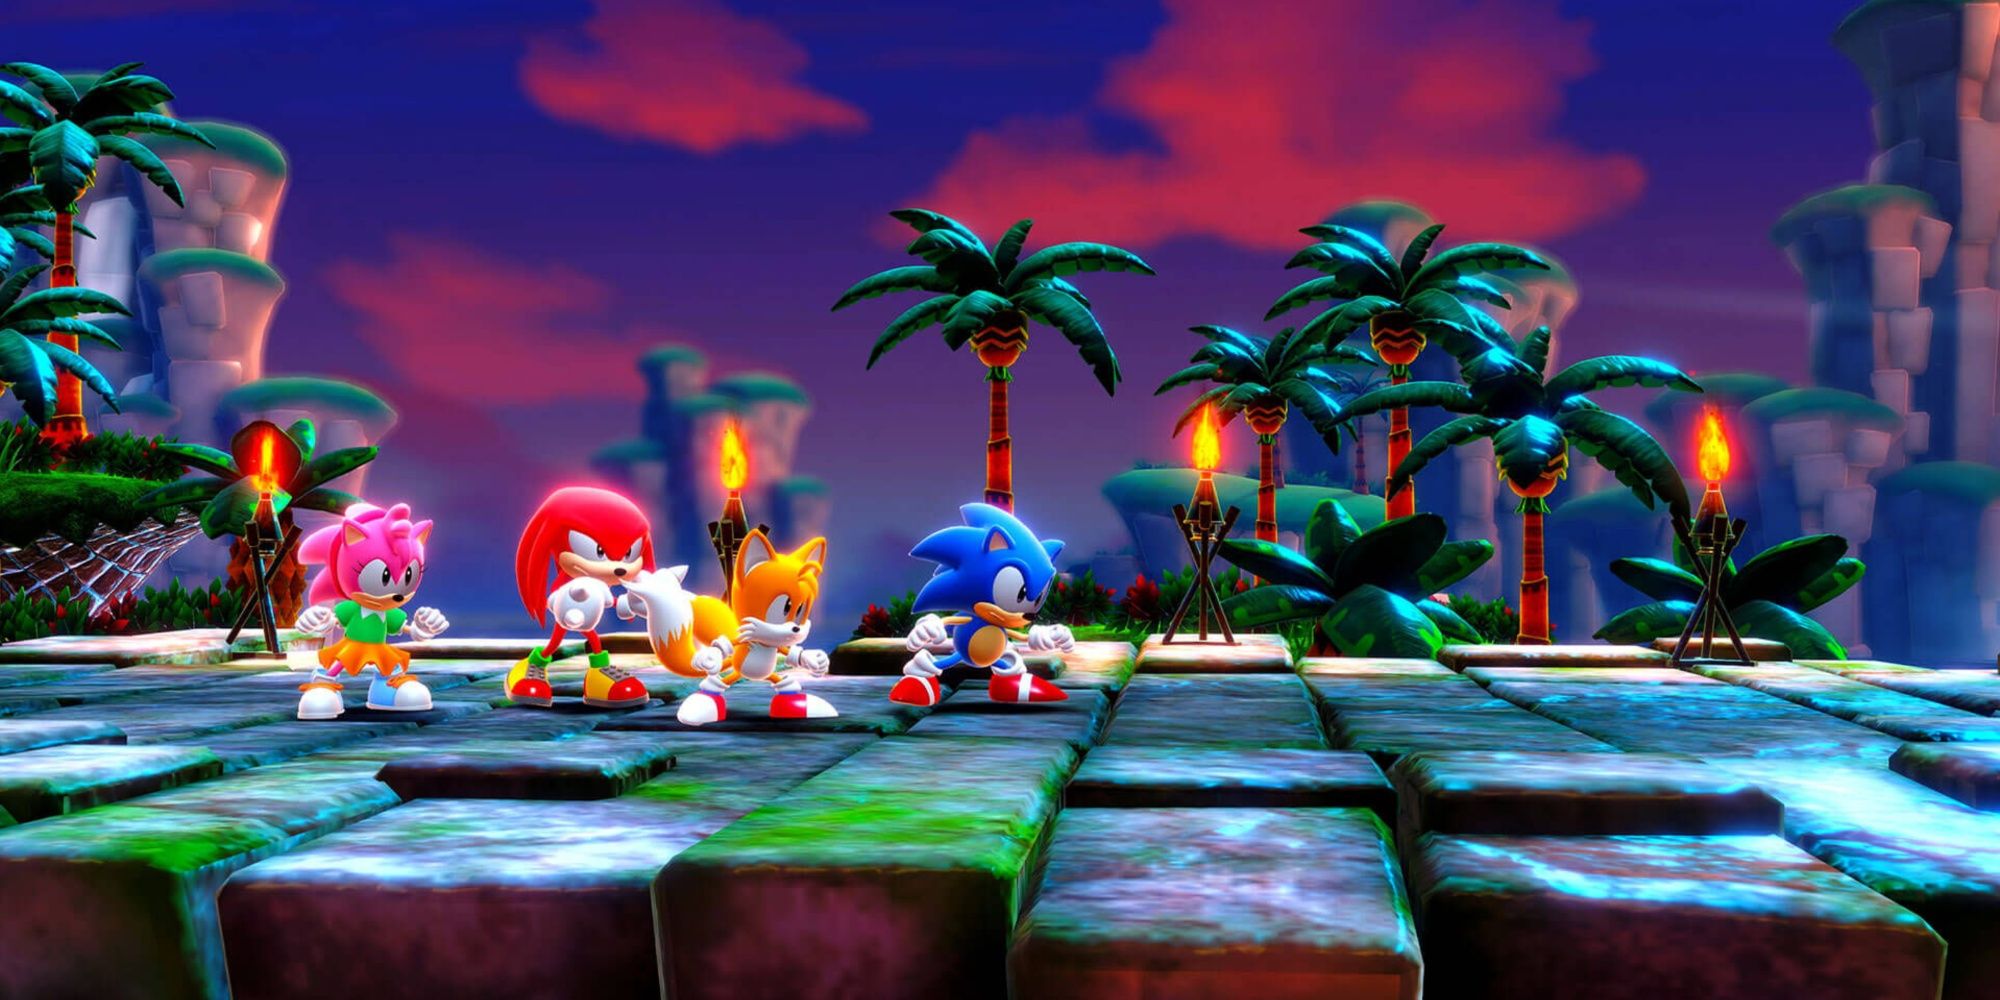 amy, knuckles, tails, and sonic preparing to fight a boss in sonic superstars